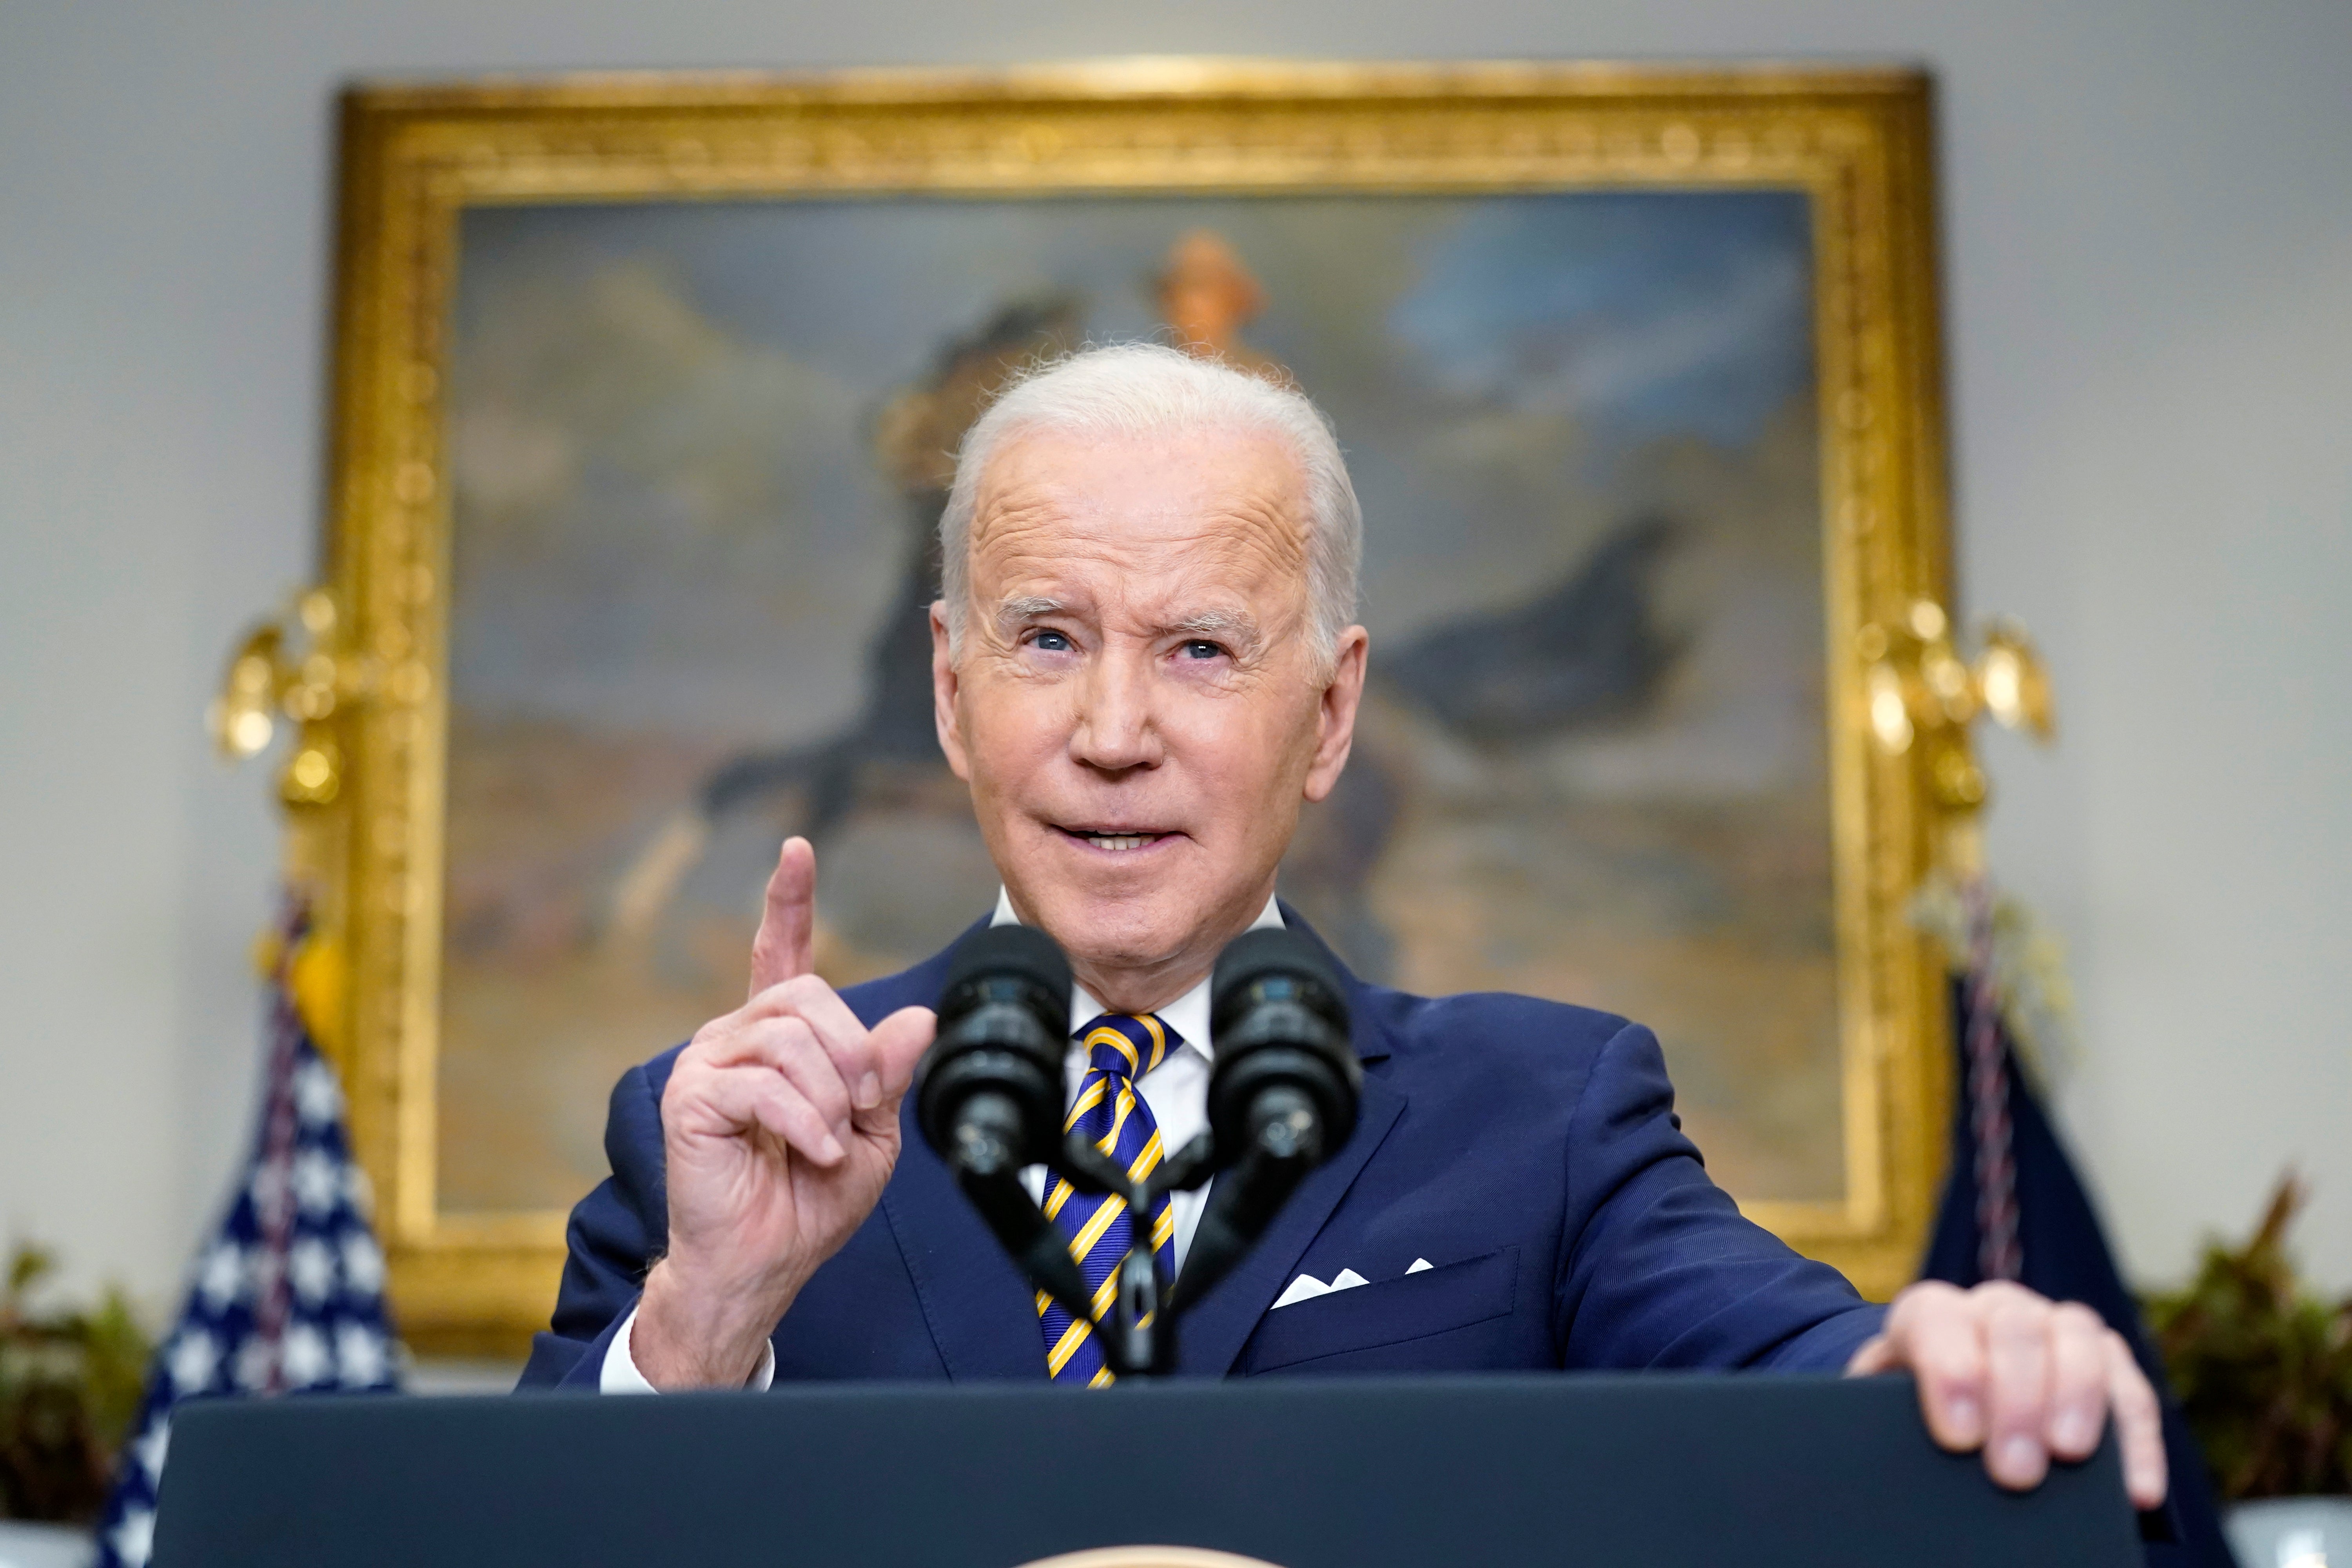 US president Joe Biden announced a ban on imports of Russian oil and gas on Tuesday.